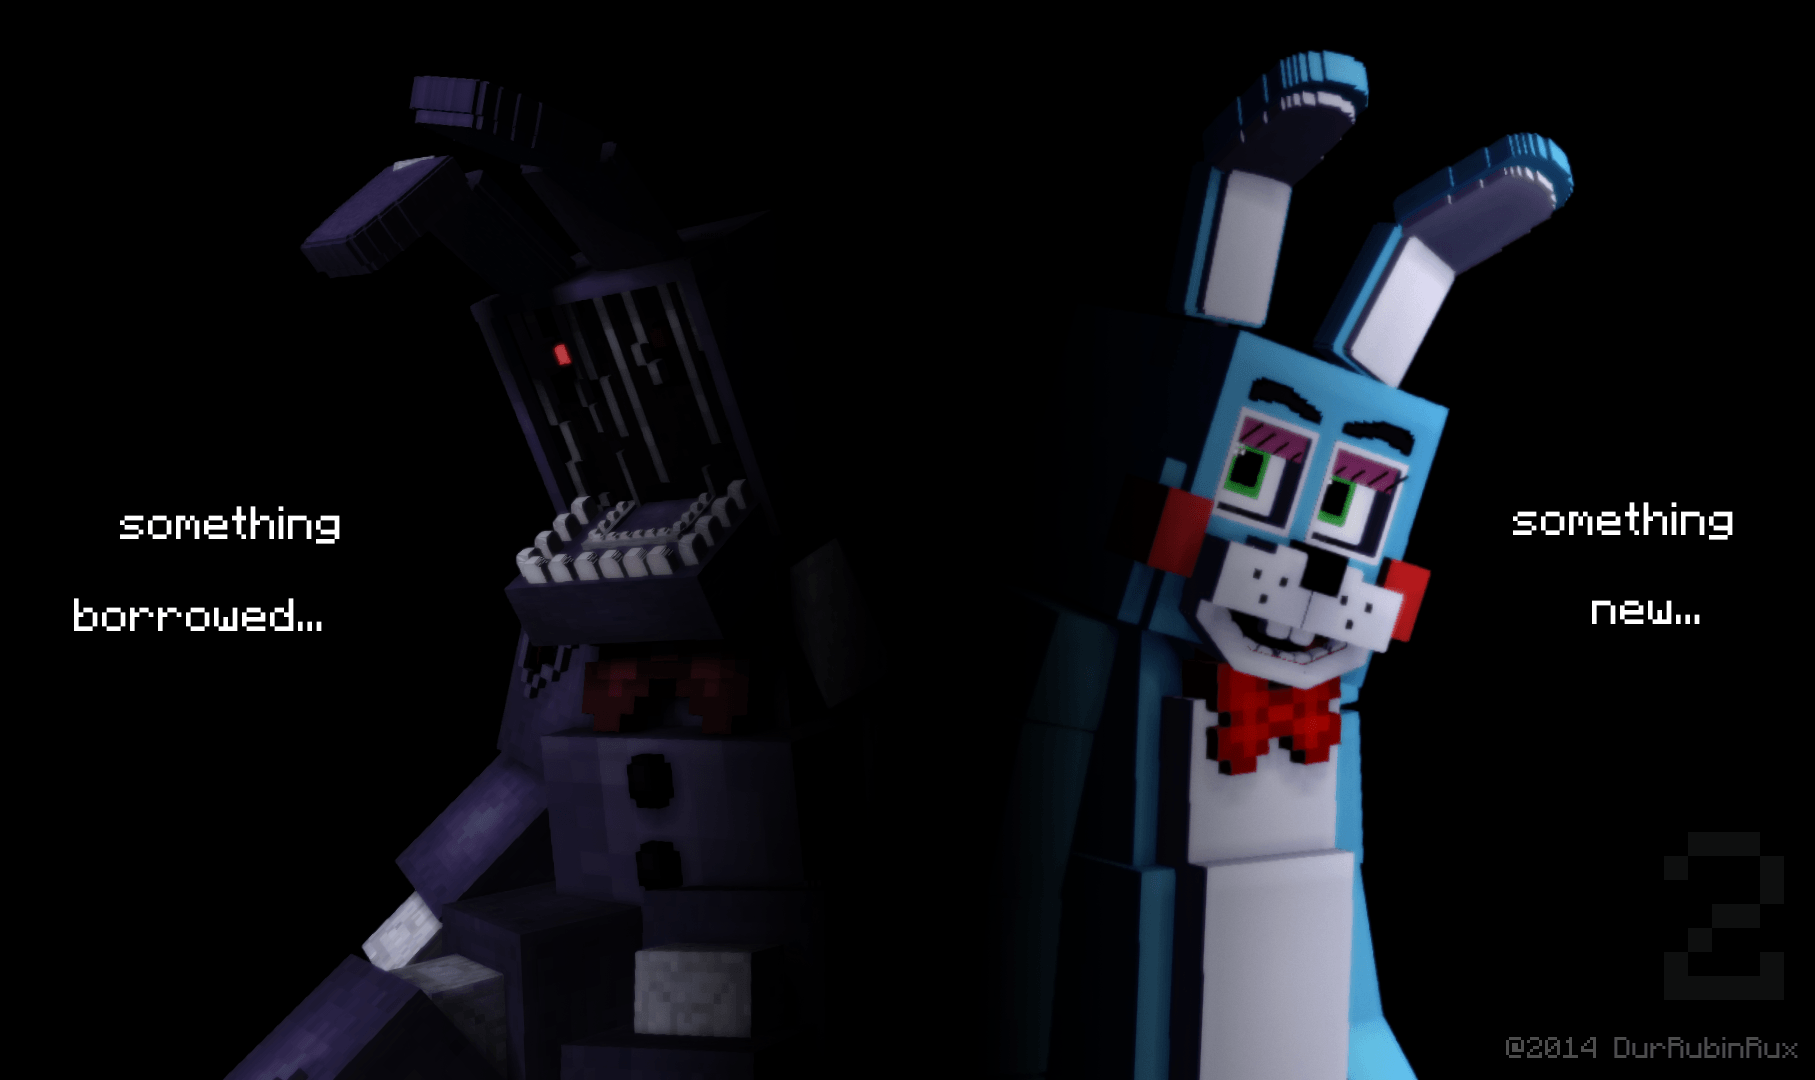 Five Nights At Freddys 2 [Wallpaper Rig] and art